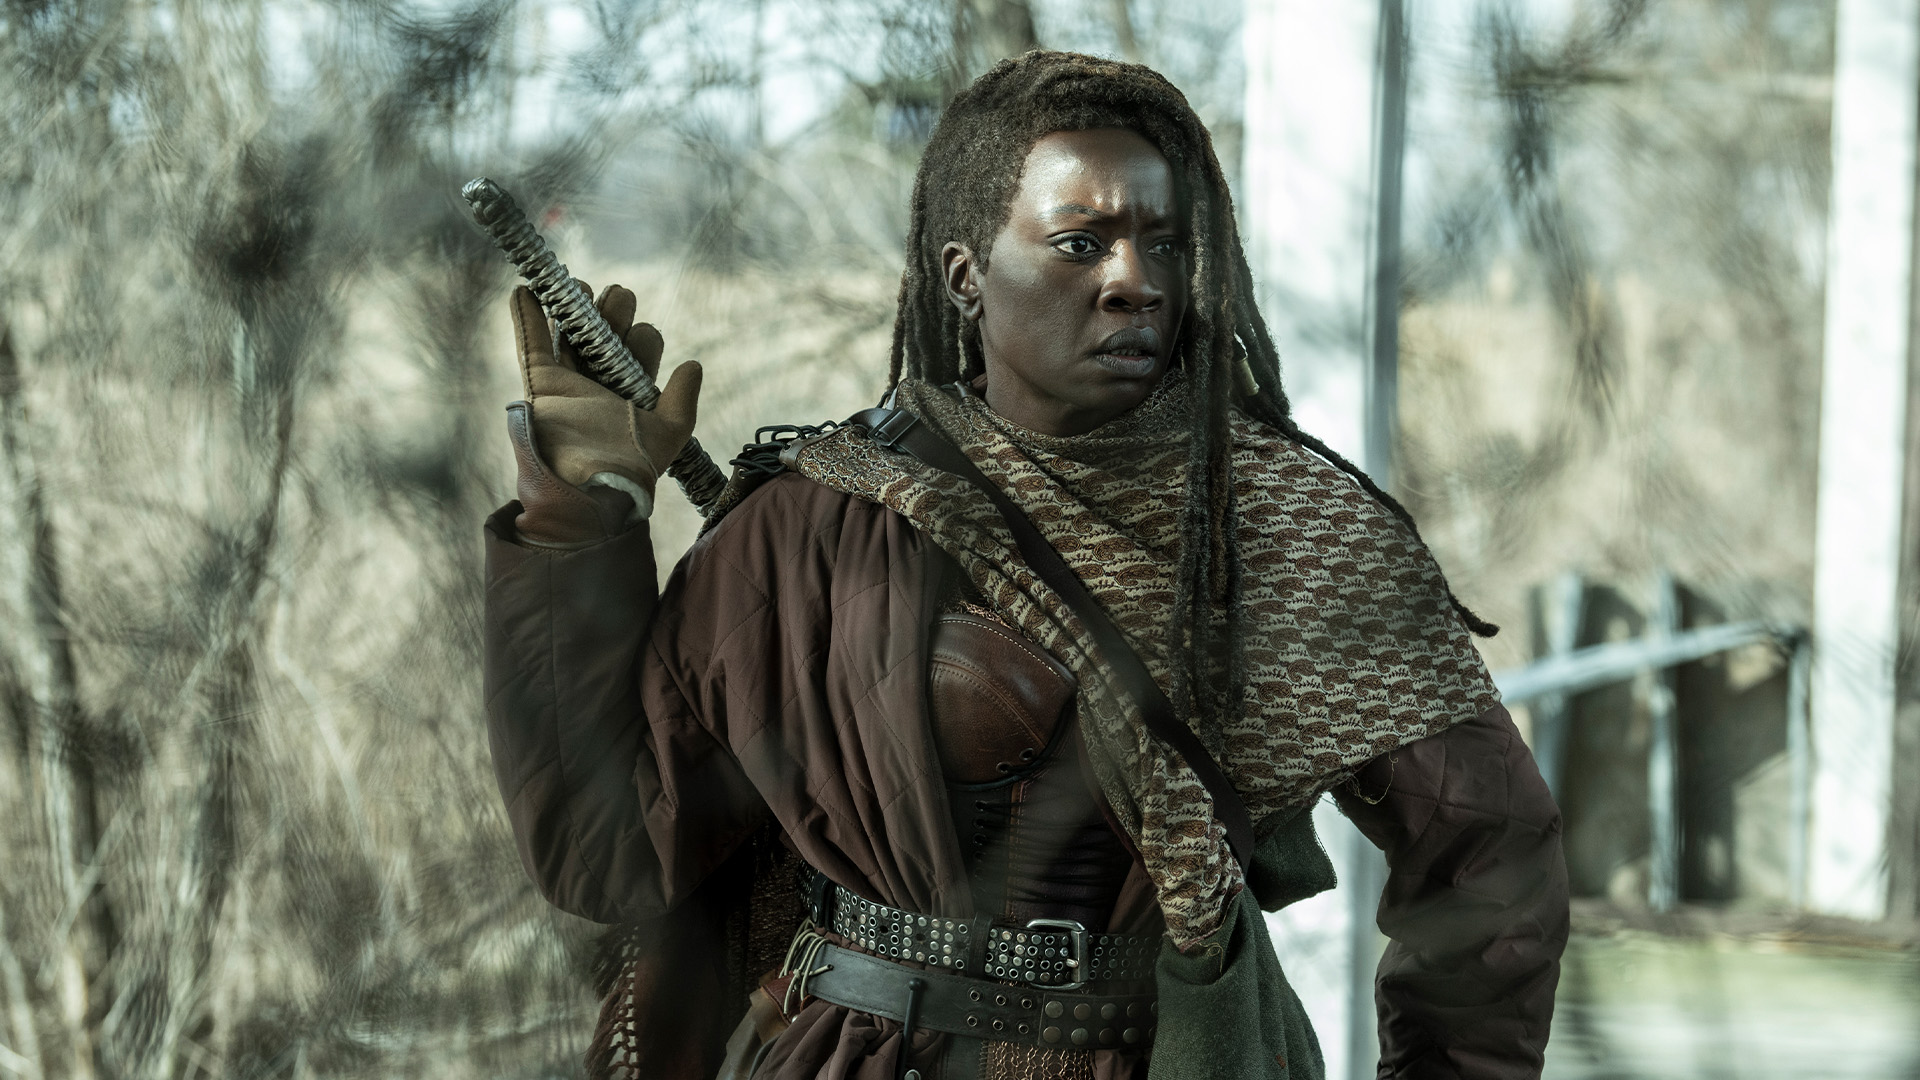 Gone, Michonne finds unexpected help on her search for Rick., TV-MA, Season 1063568, Episode 2